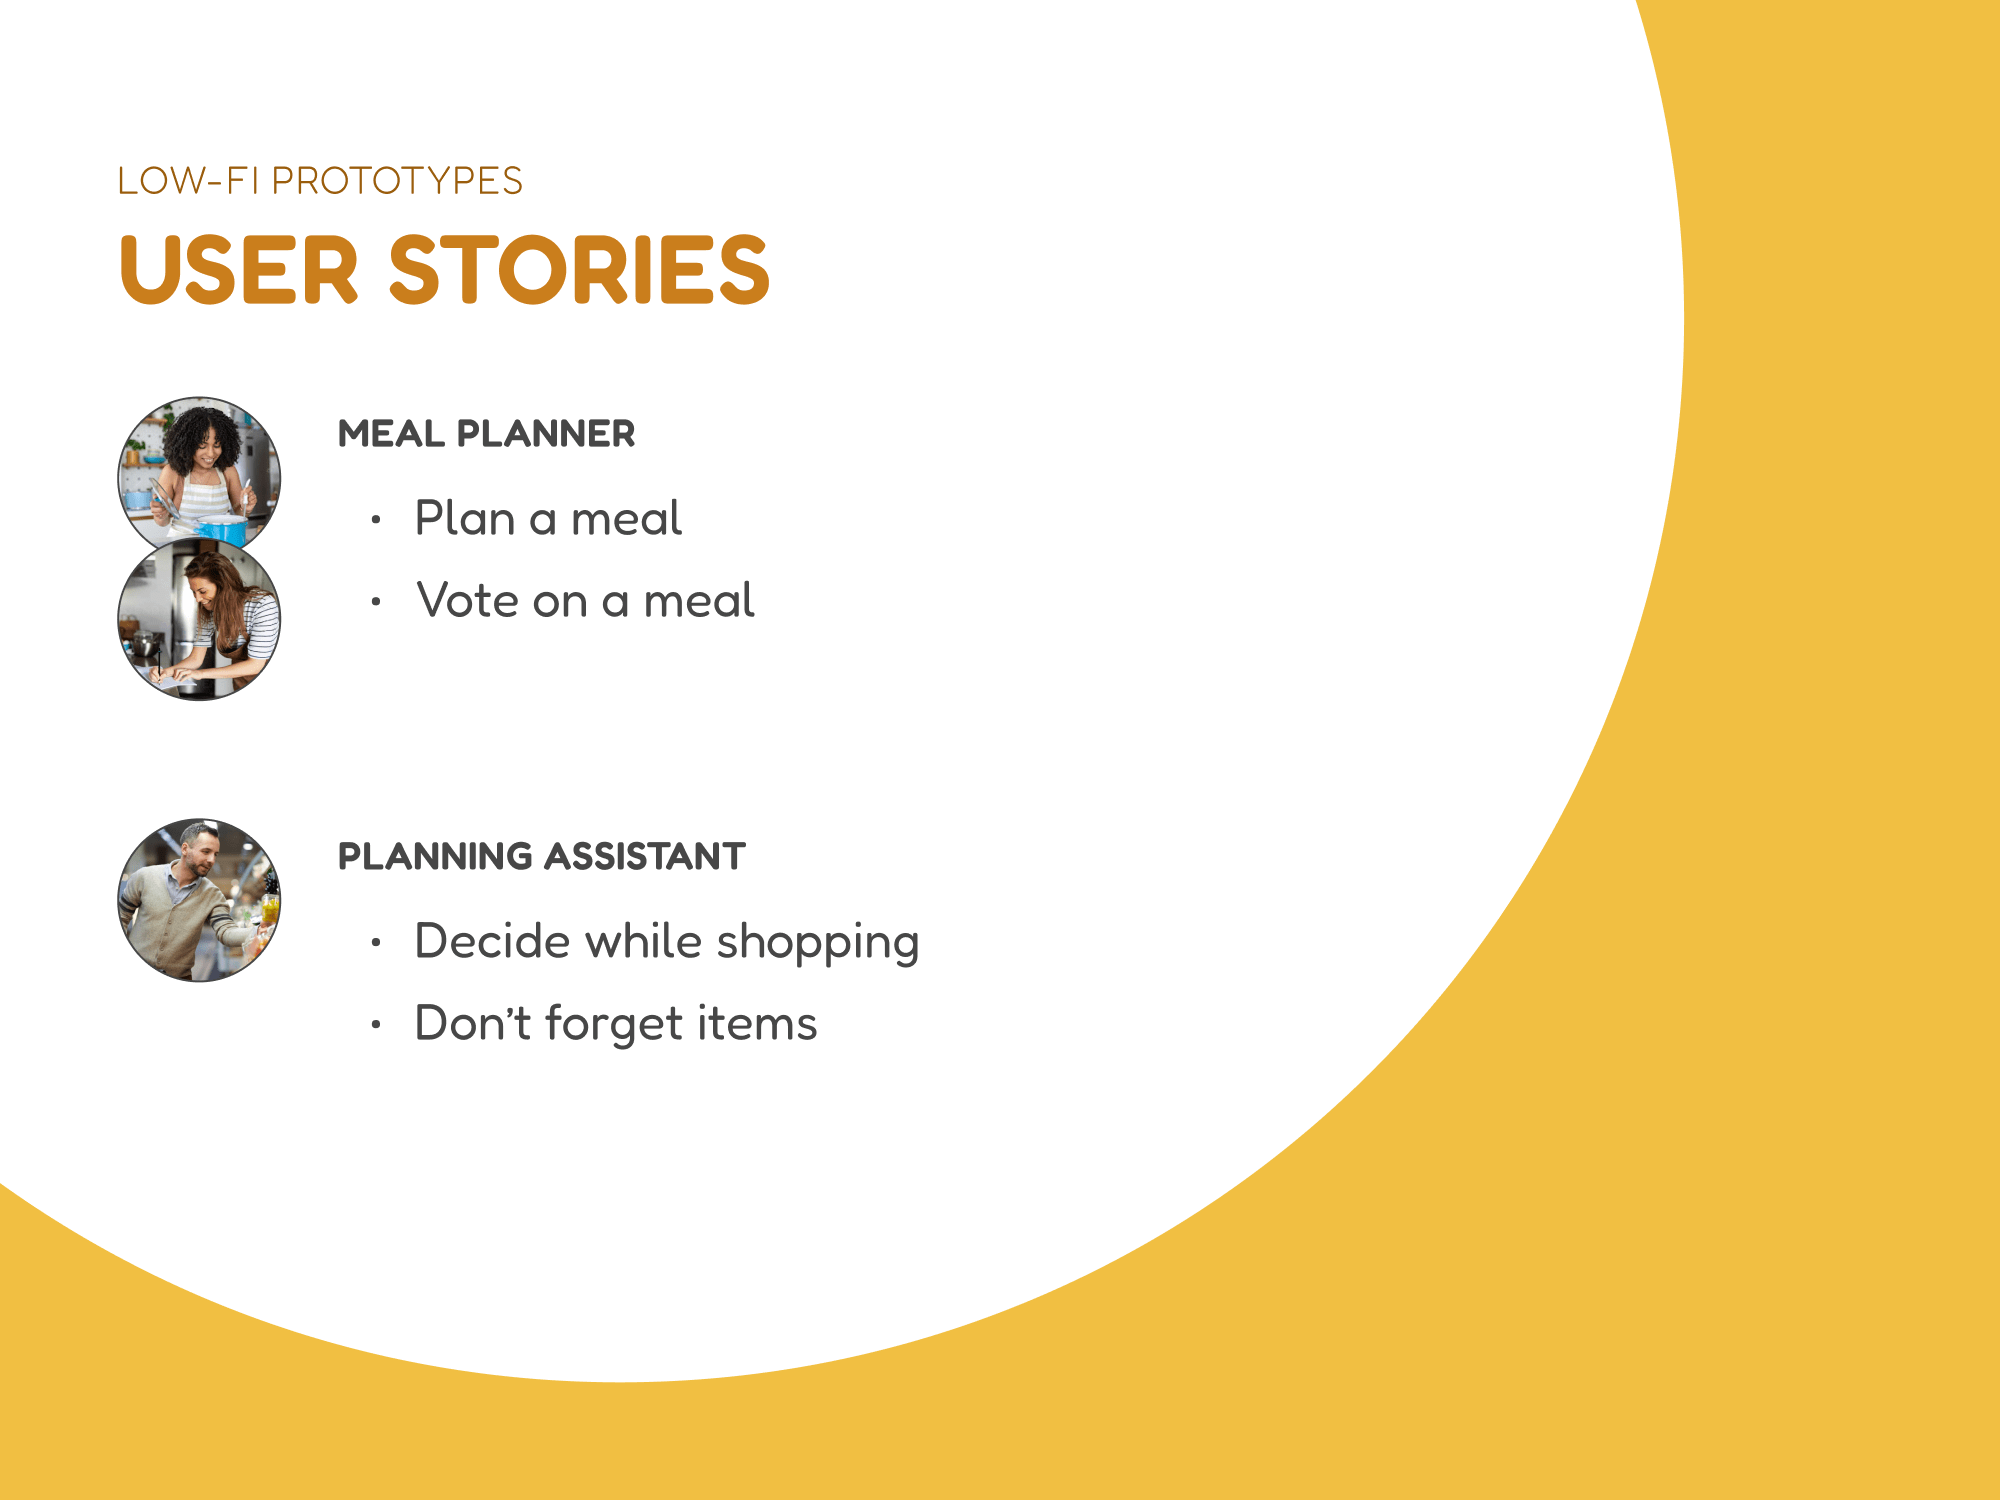 User stories for meal planner and planning assistant. Meal planner's stories are to plan a meal and vote on a meal. The planning assistant's stories are the decide on items while shopping and to not forget items.